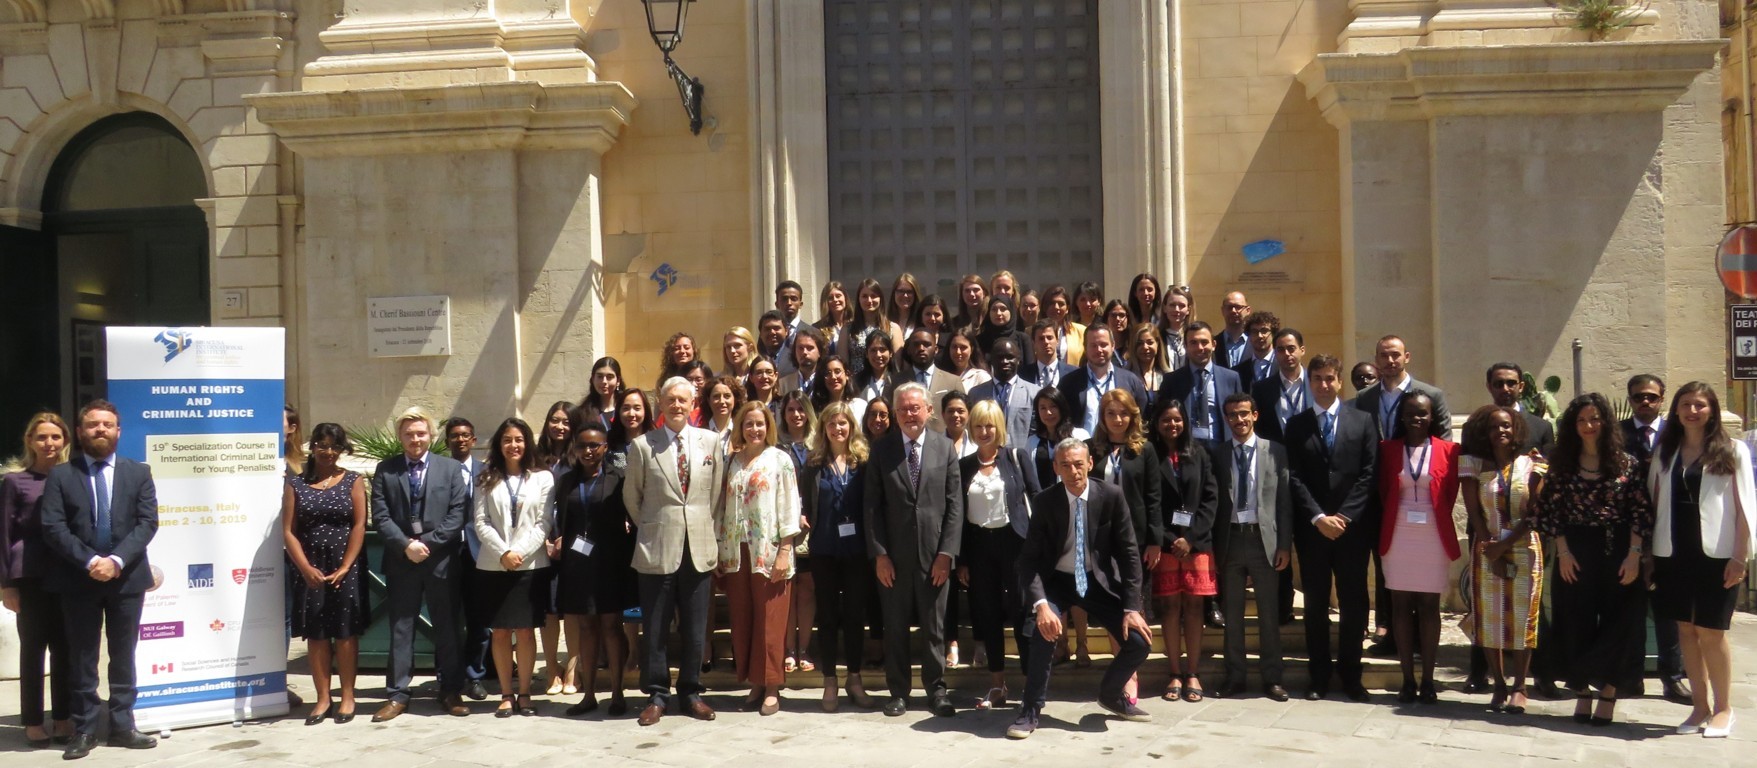 20th Specialization Course in International Criminal Law